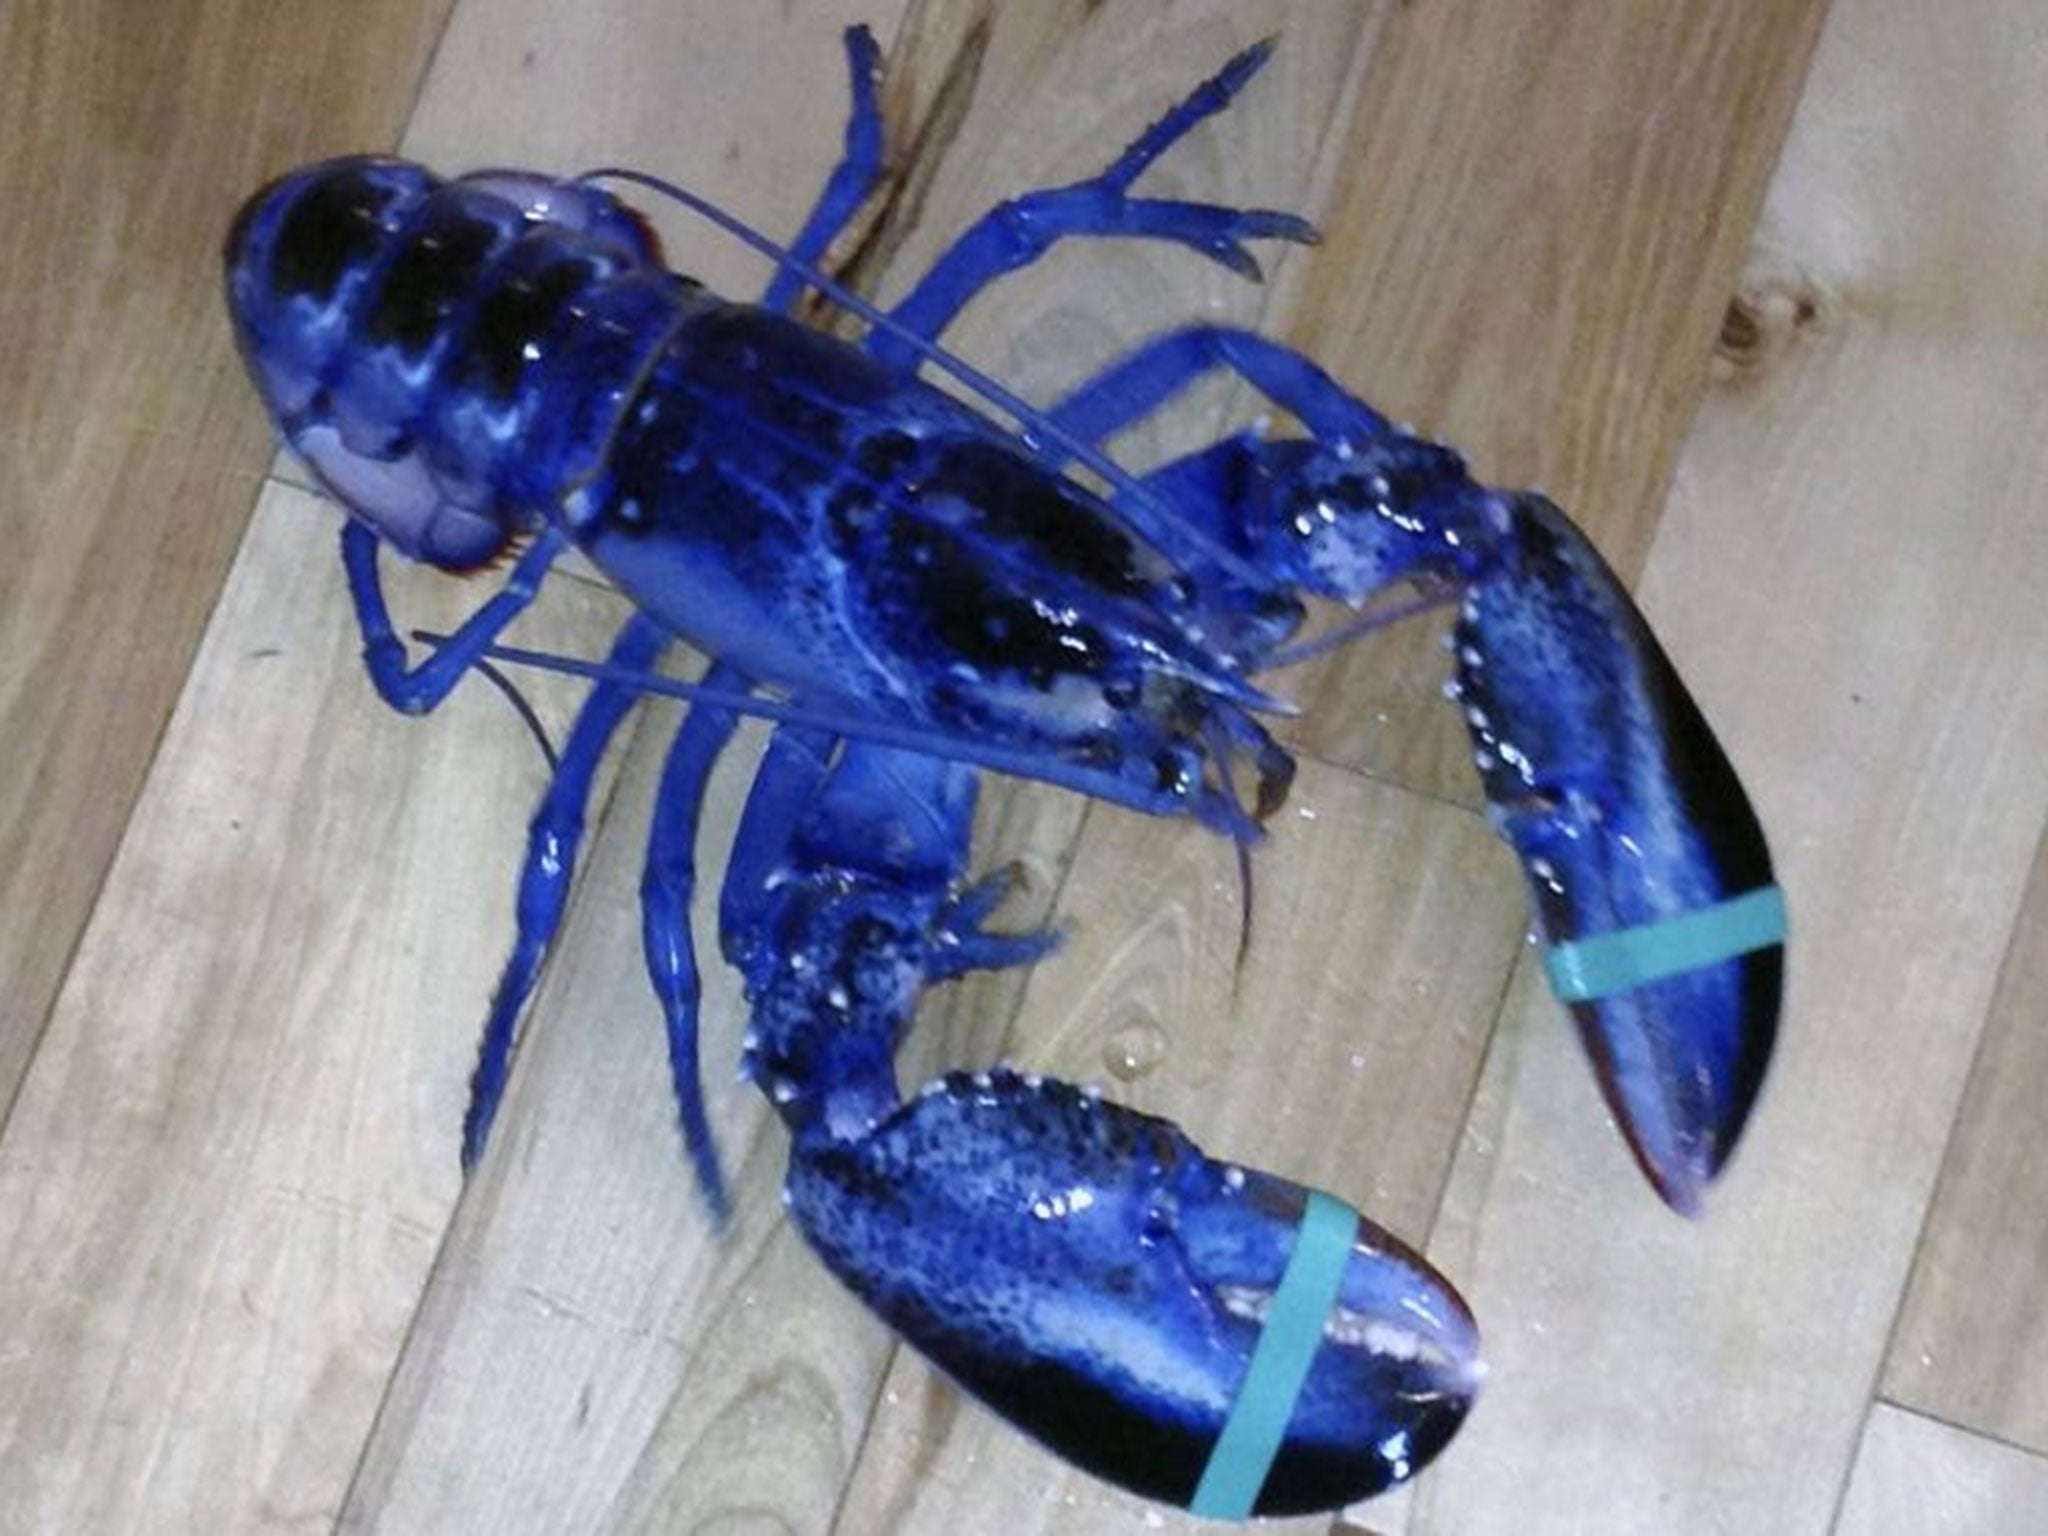 A blue lobster caught by her father Jay LaPlante off Pine Point in Scarborough, Maine Saturday. The crustacean is being donated to the Maine State Aquarium.